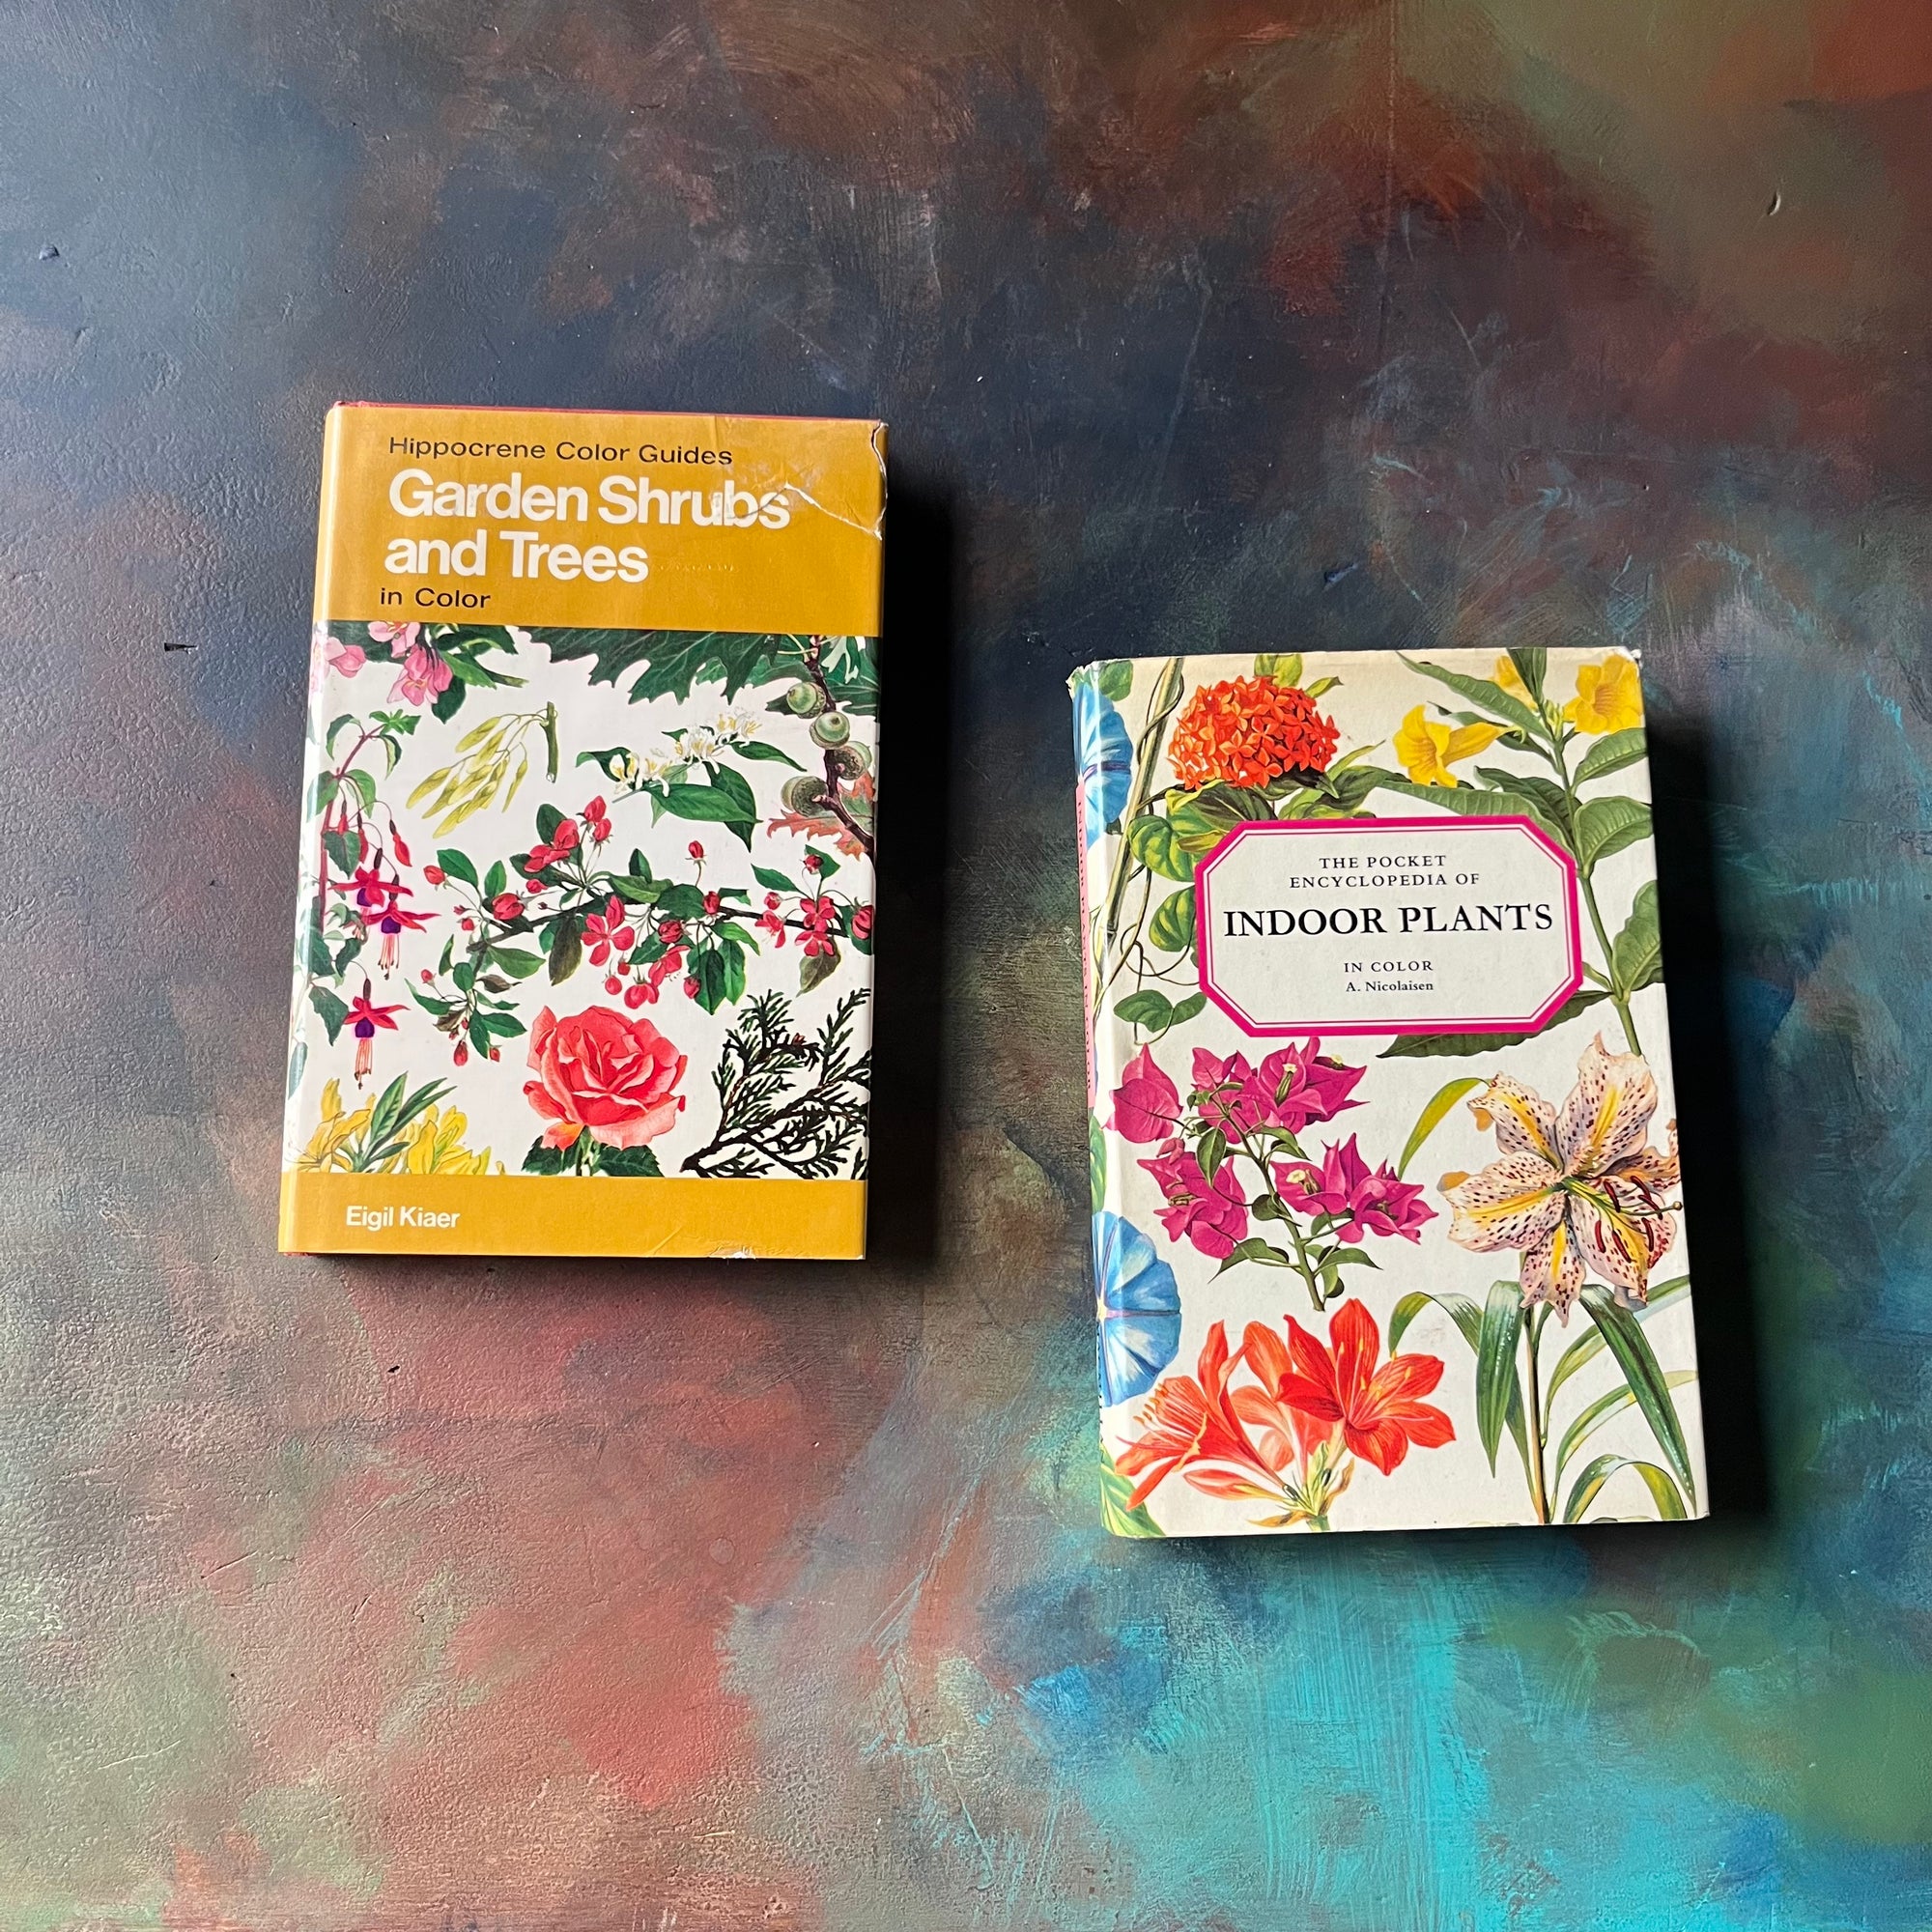 Pair of vintage plant books-Garden Shrubs & Trees and The Pocket Encyclopedia of Indoor Plants--vintage nature pocket guides-view of the dust jacket's front covers with colorful illustrations